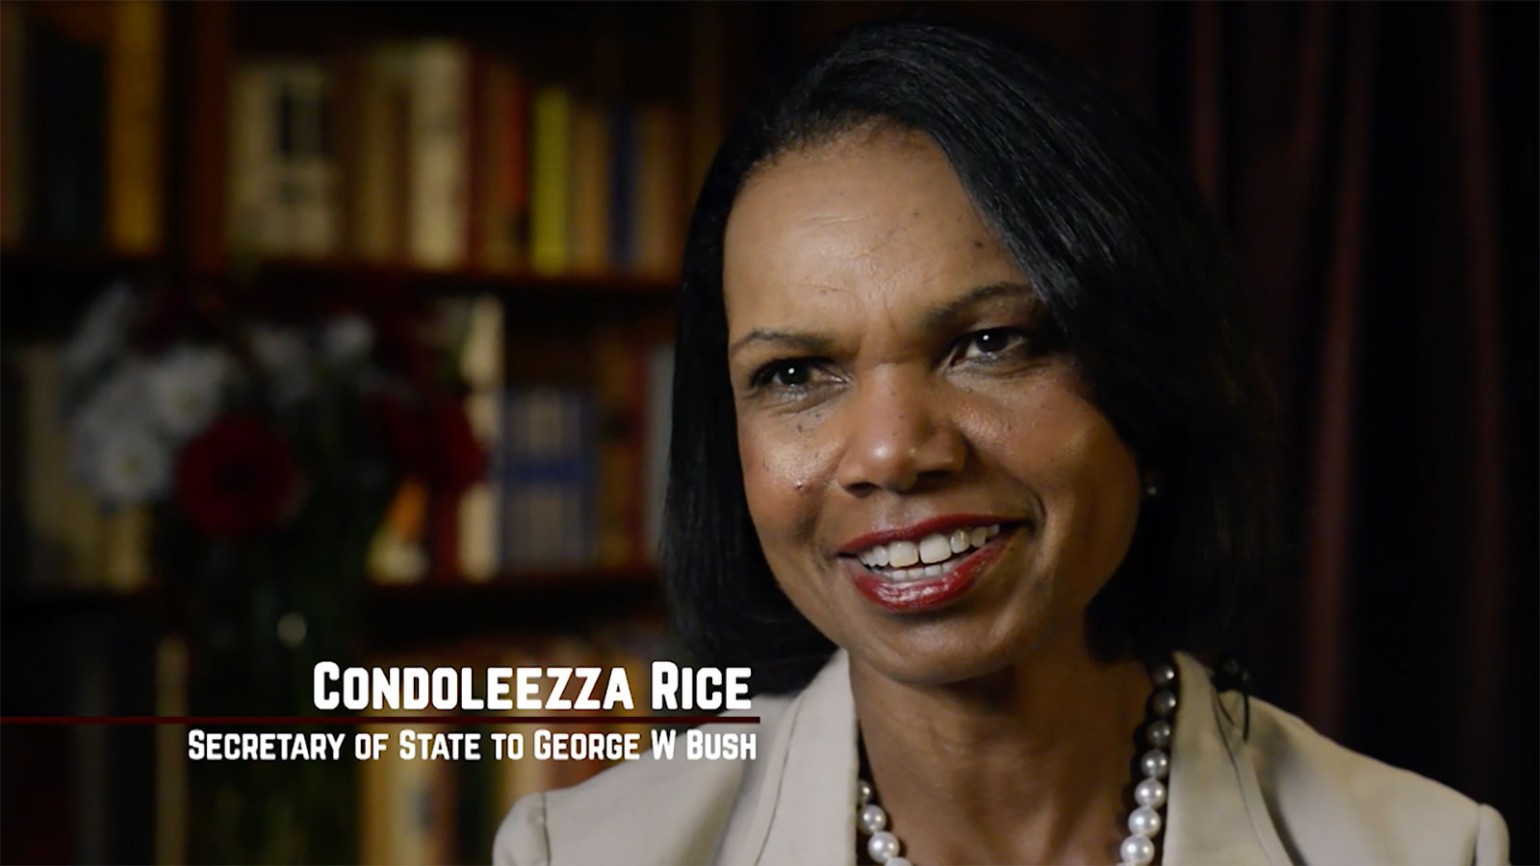 Still image of interview with Condoleezza Rice from film "American Umpire." Photo courtesy of James Shelley.